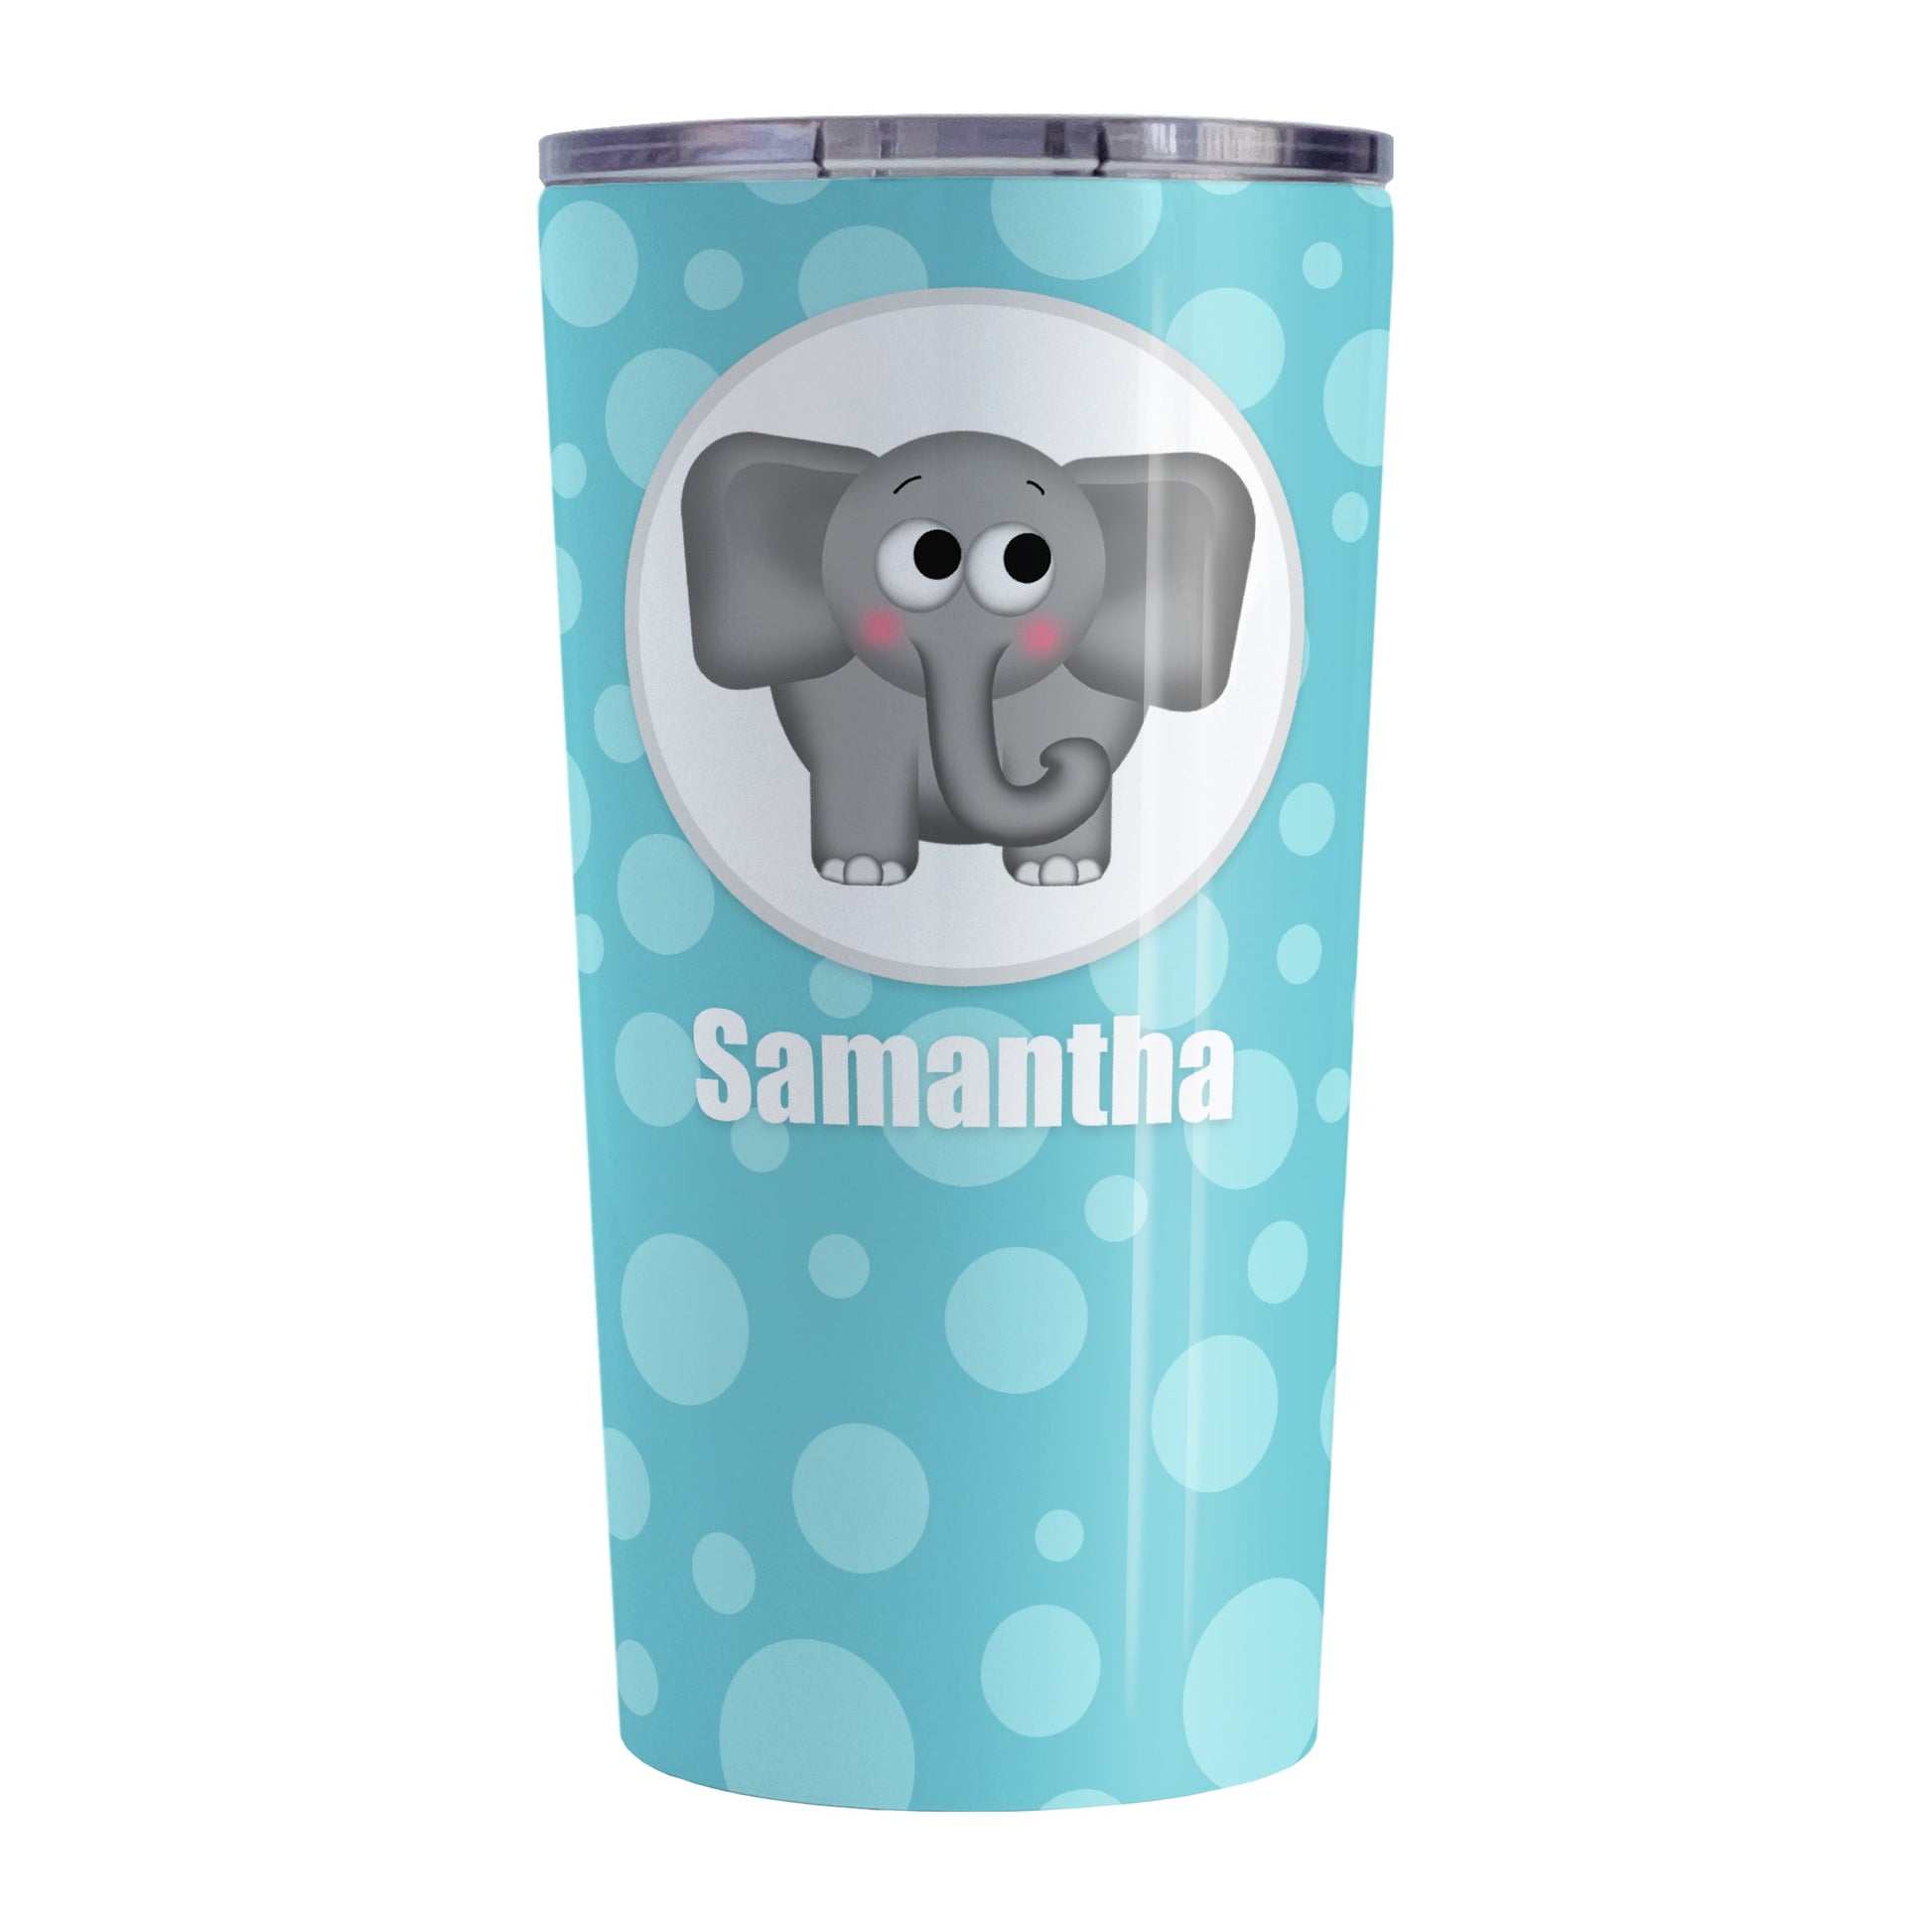 Cute Elephant Bubbly Turquoise Personalized Tumbler Cup (20oz, stainless steel insulated) at Amy's Coffee Mugs